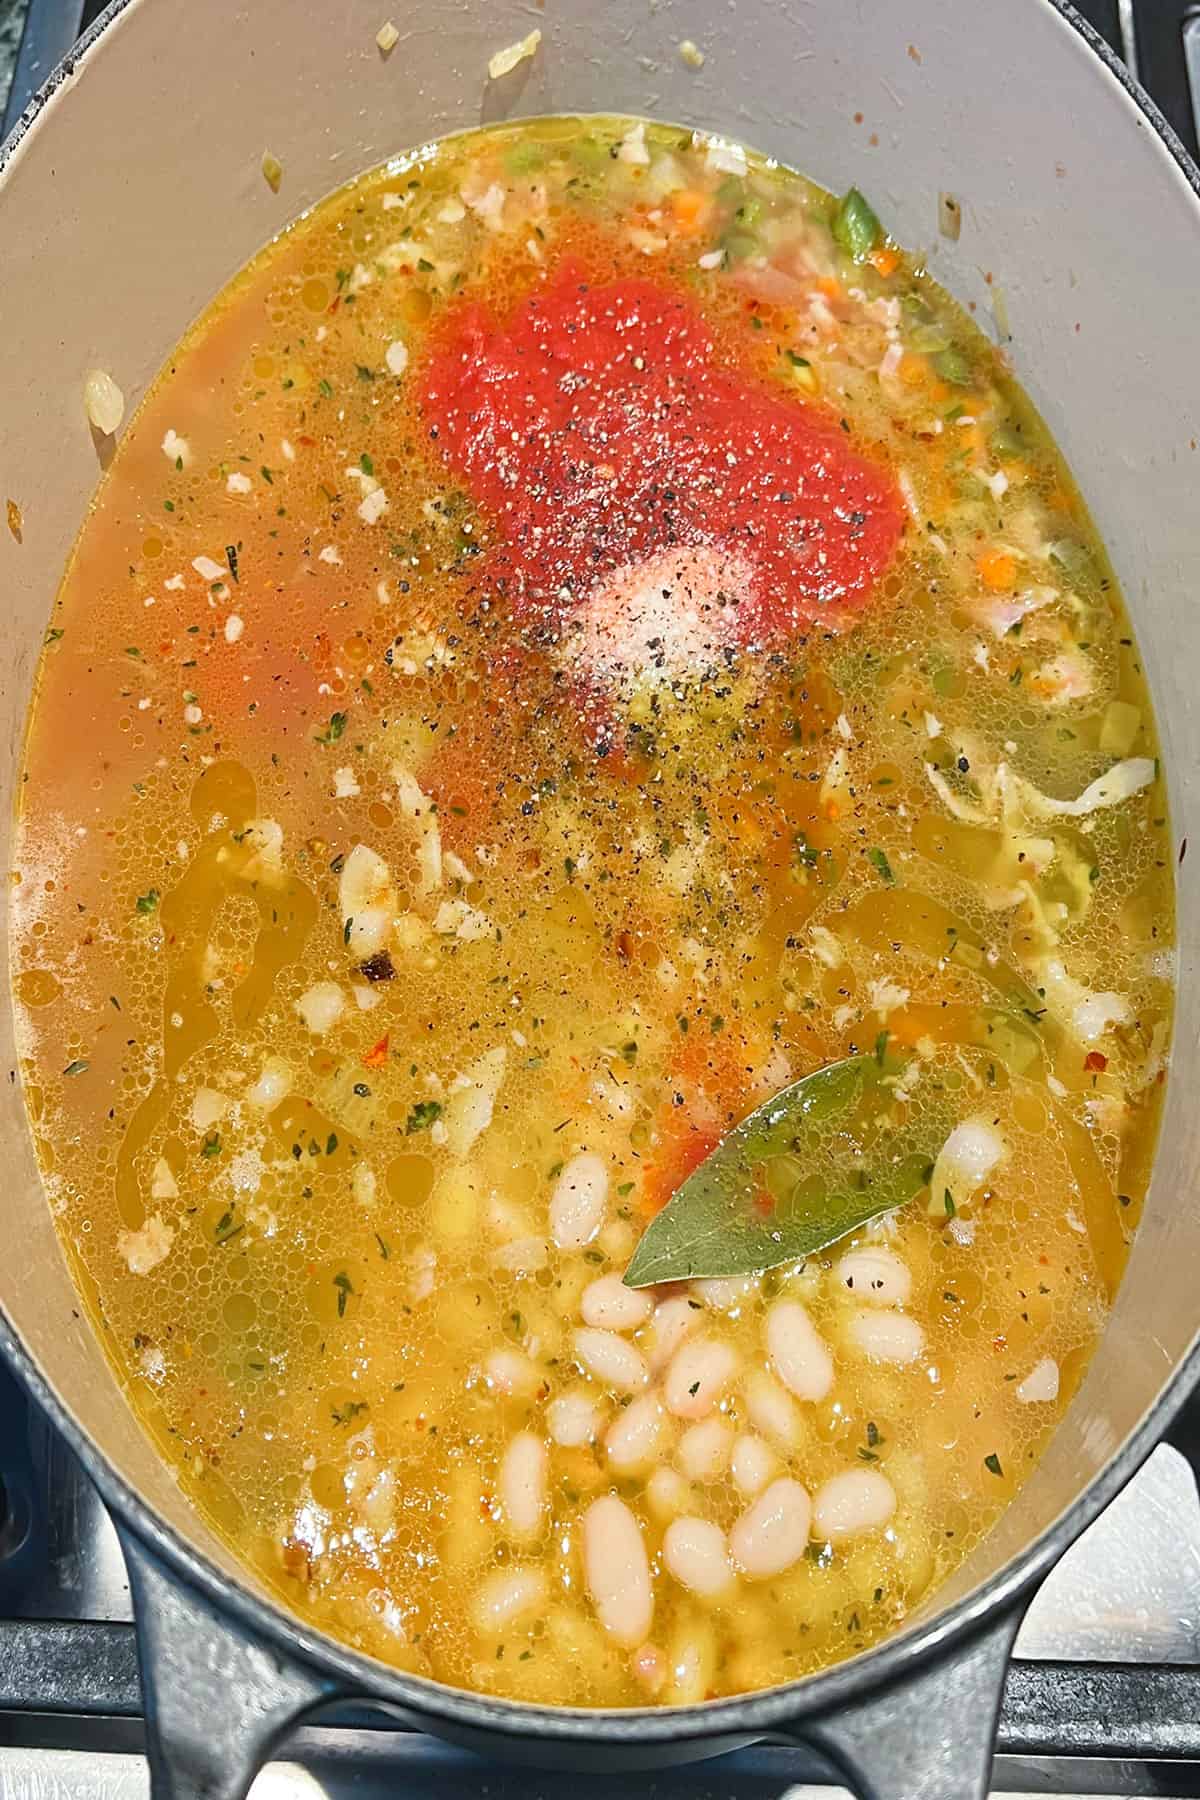 Dutch oven filled with broth, canned tomato puree, a bay leaf, white beans, and other ingredients for pasta and bean soup